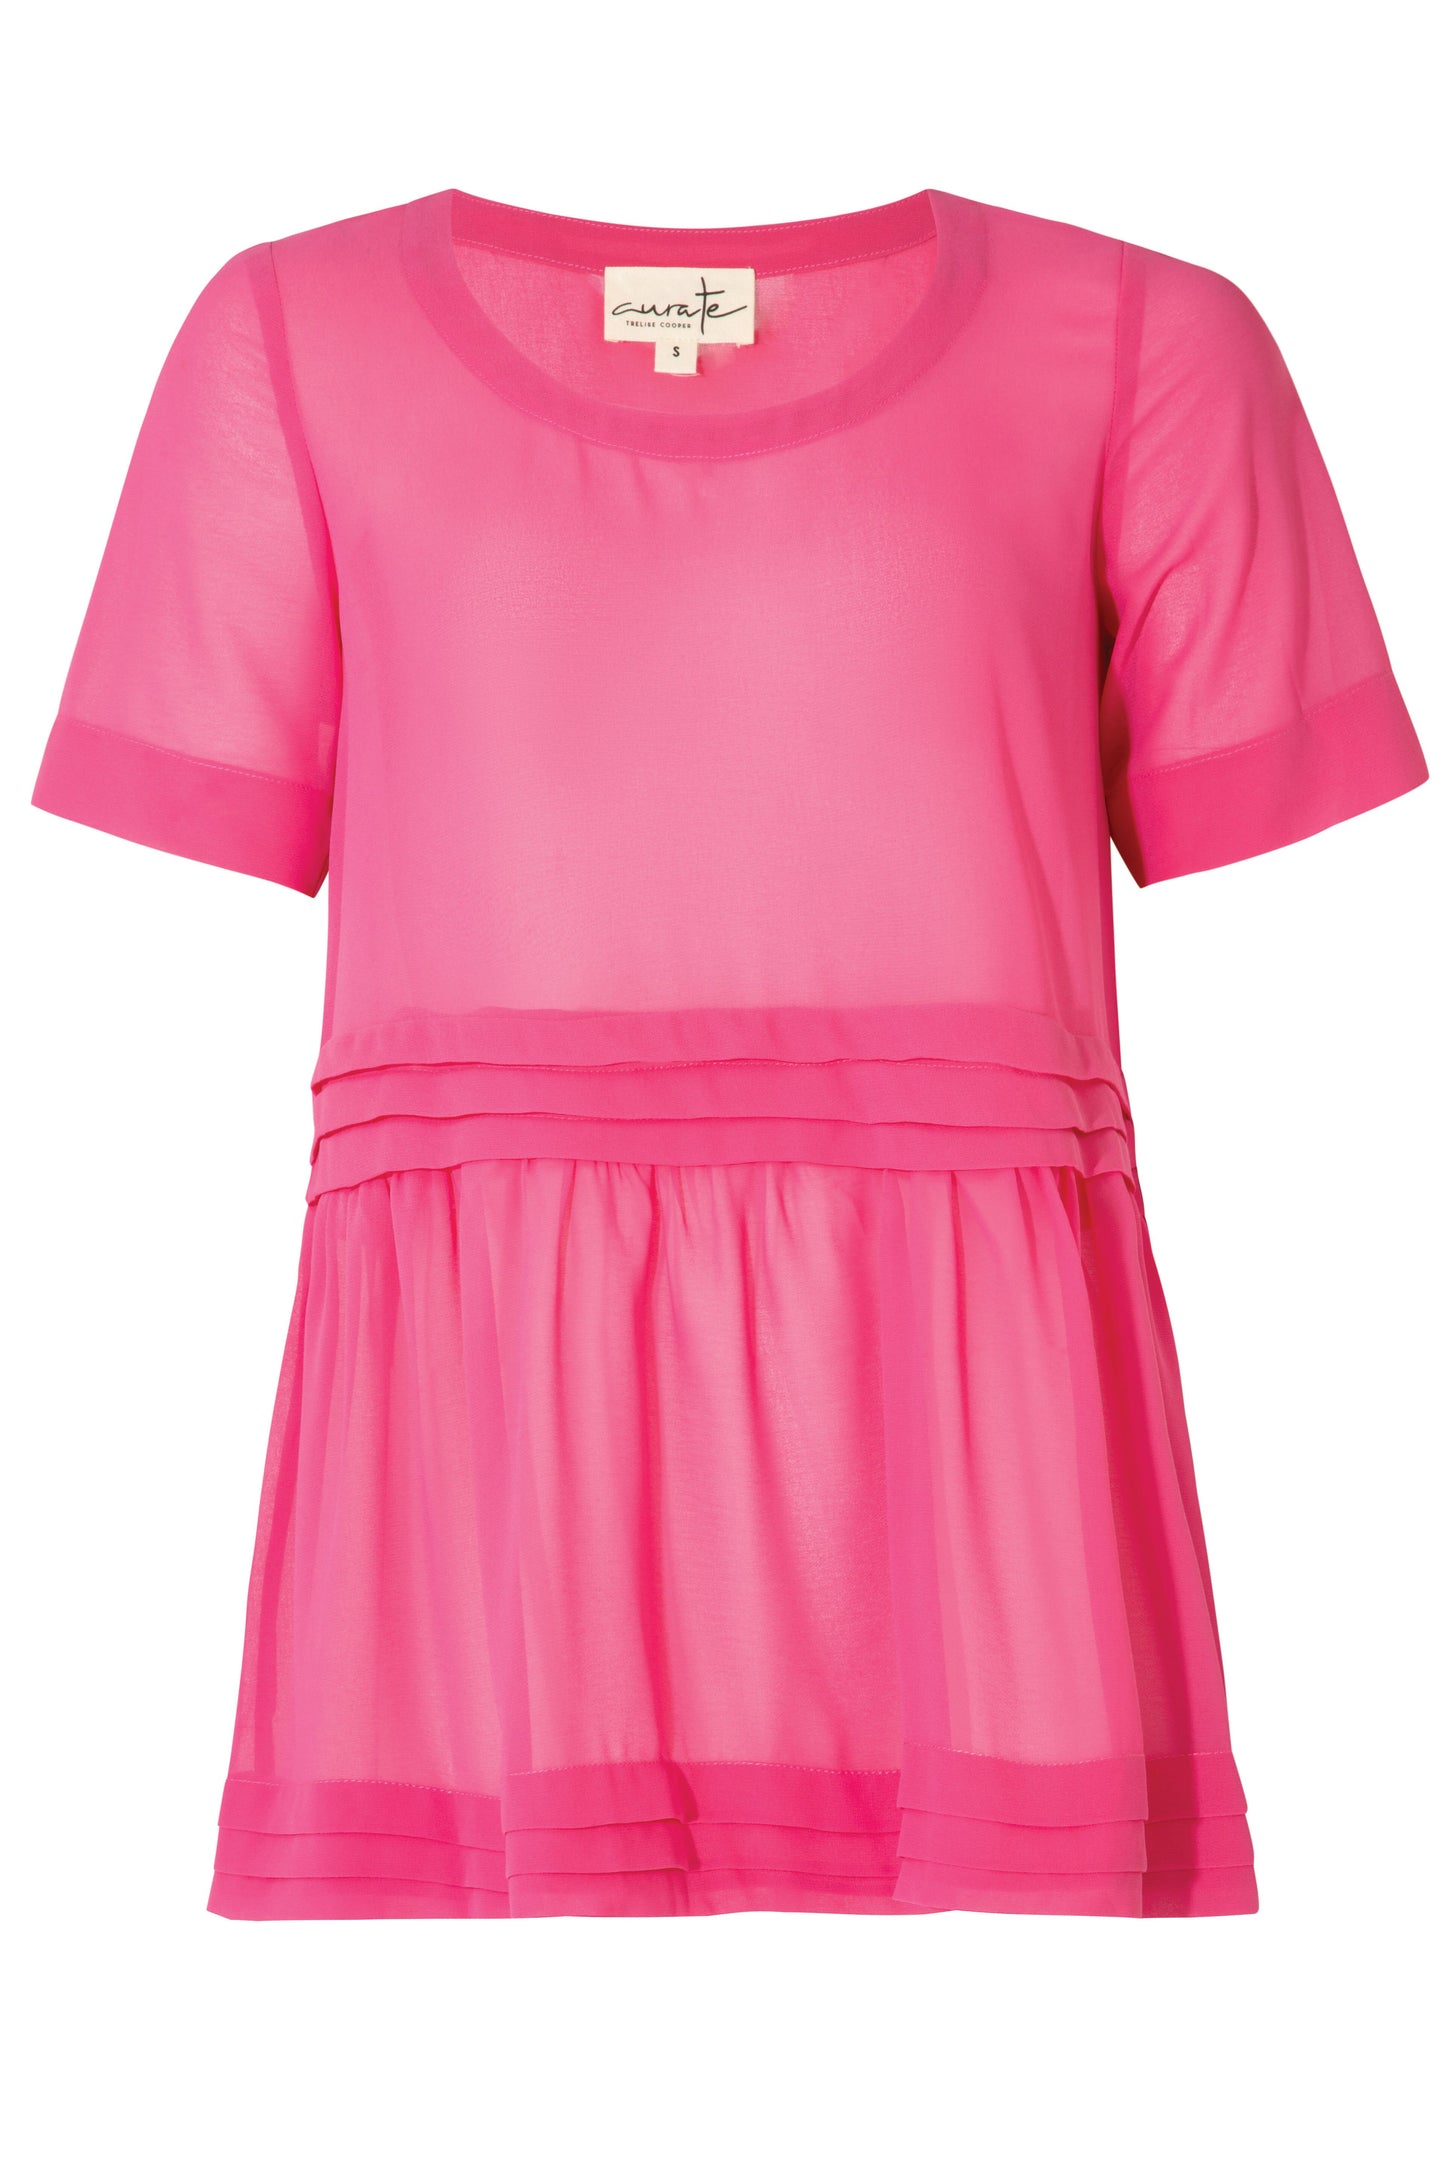 CURATE LIGHT HEARTED TOP - PINK - THE VOGUE STORE